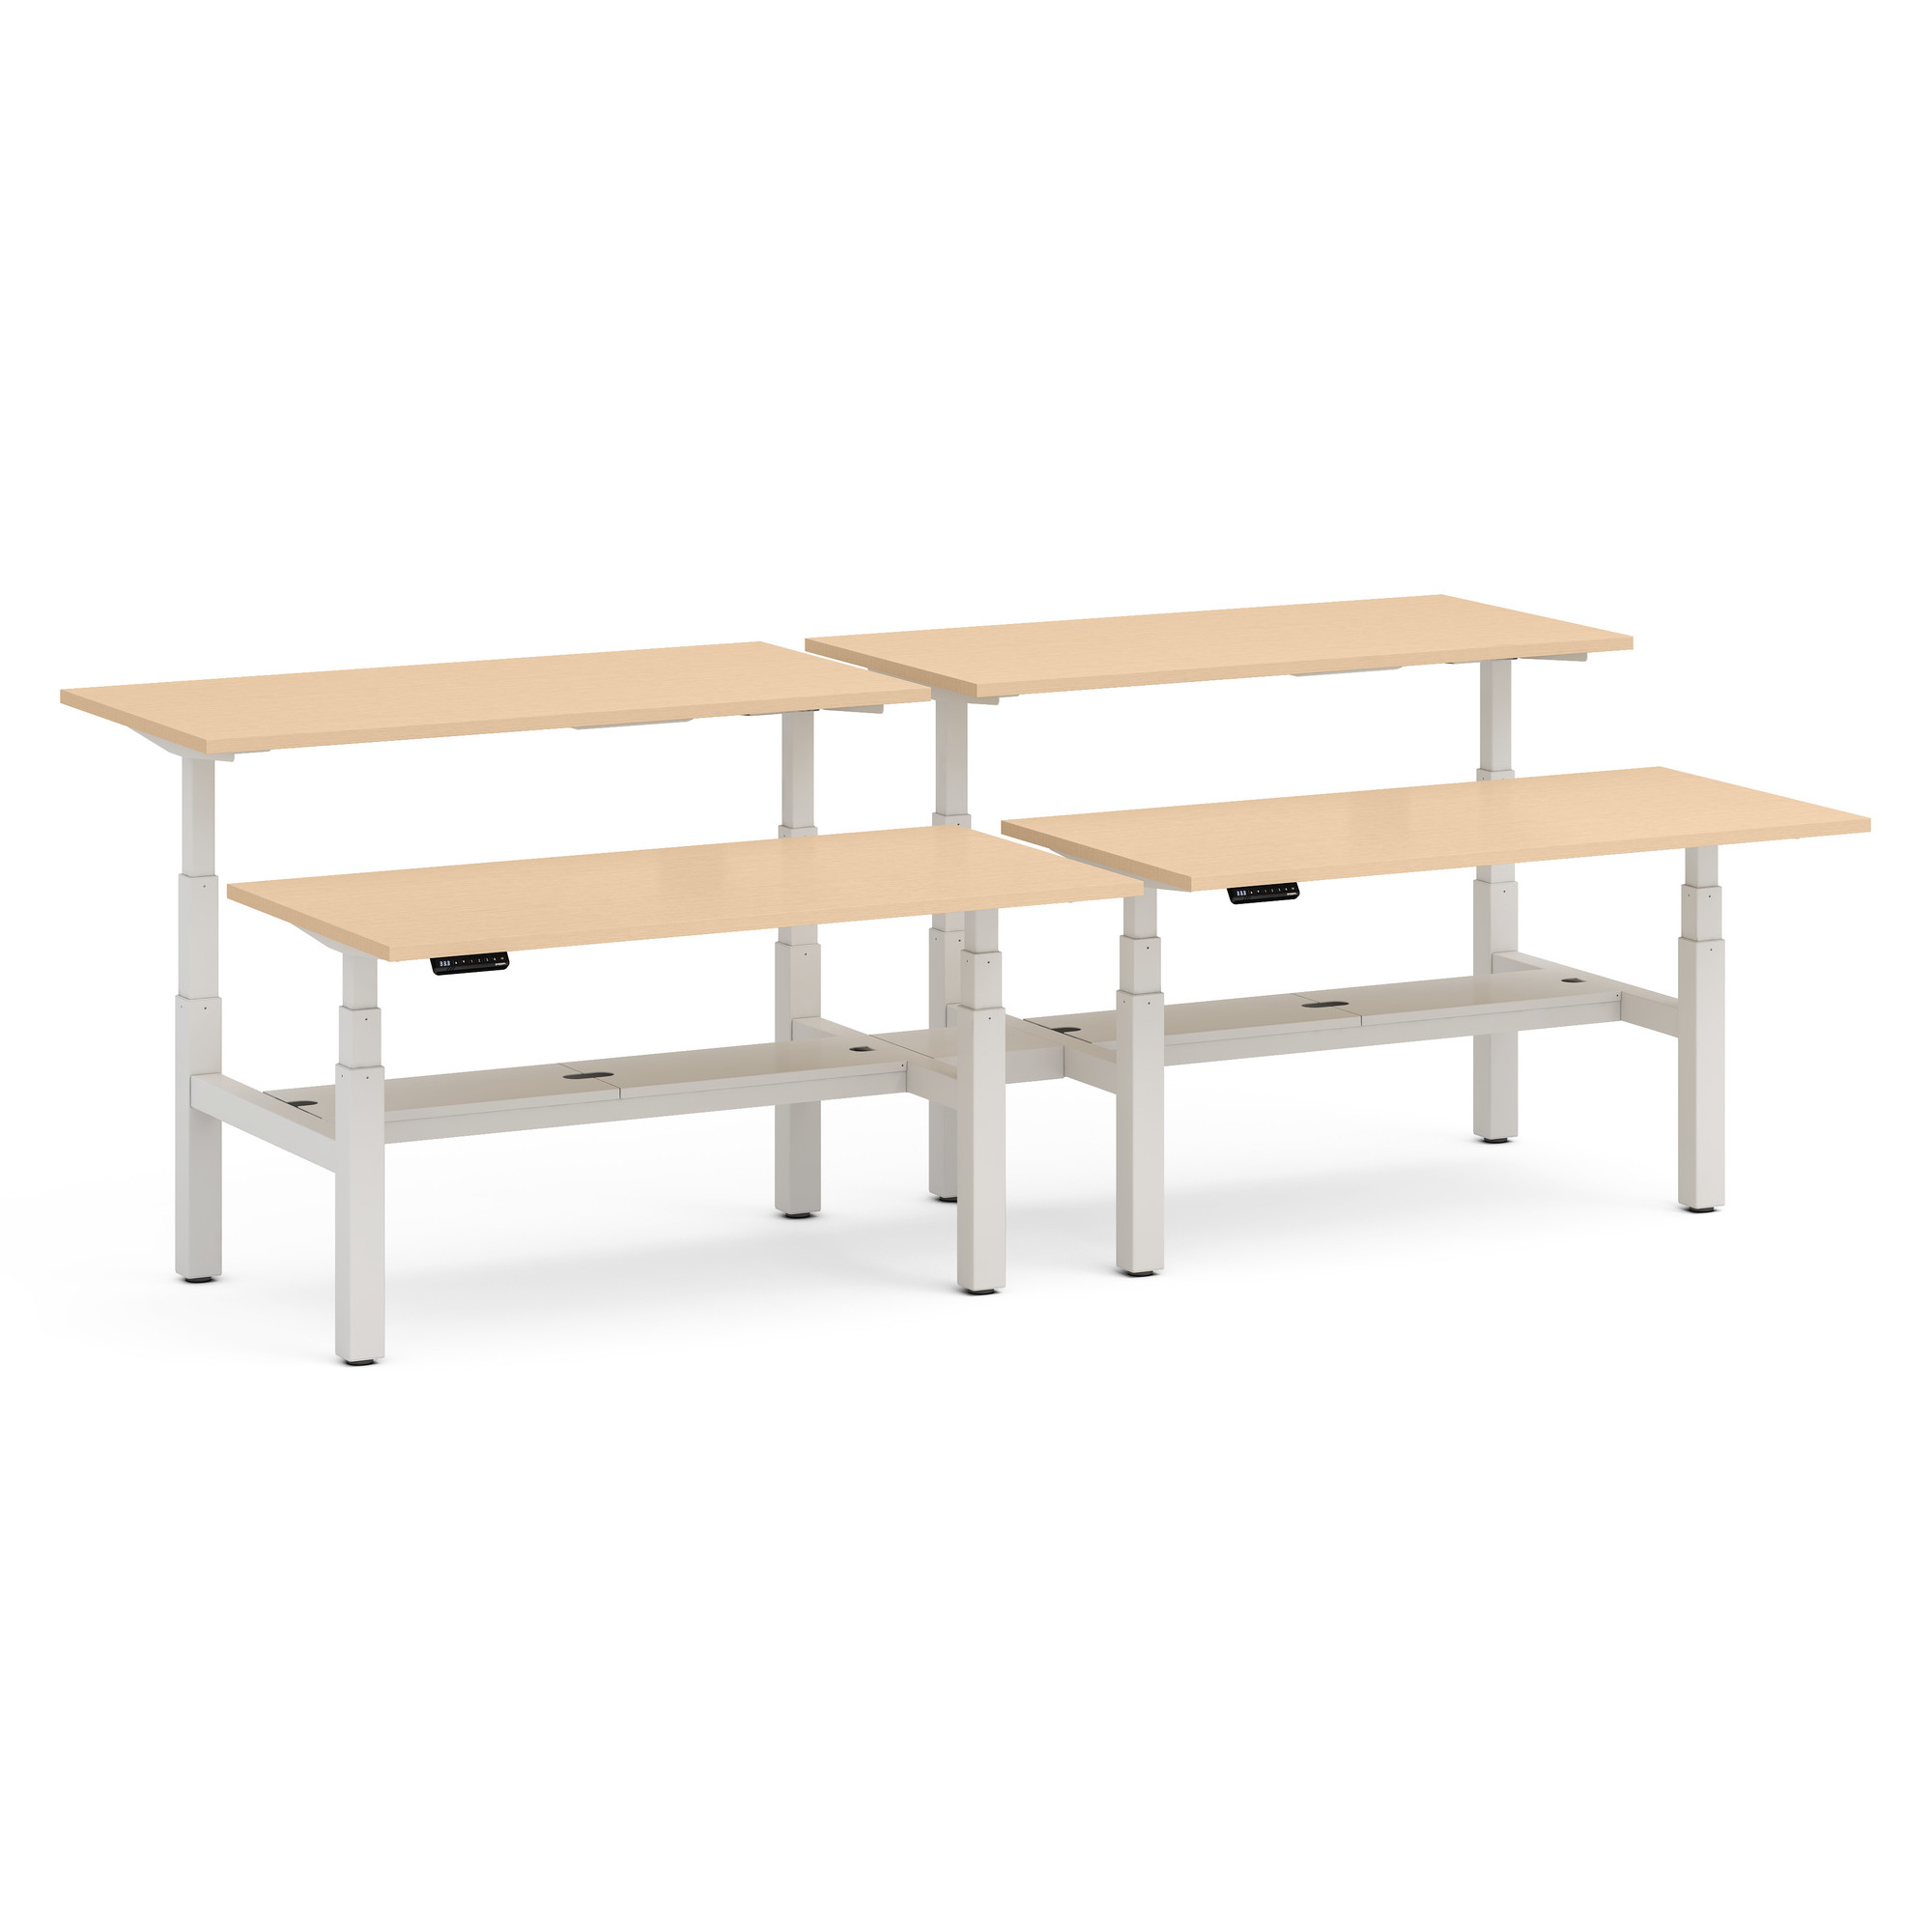 Series L Adjustable Height Double Desk for 4, White Legs